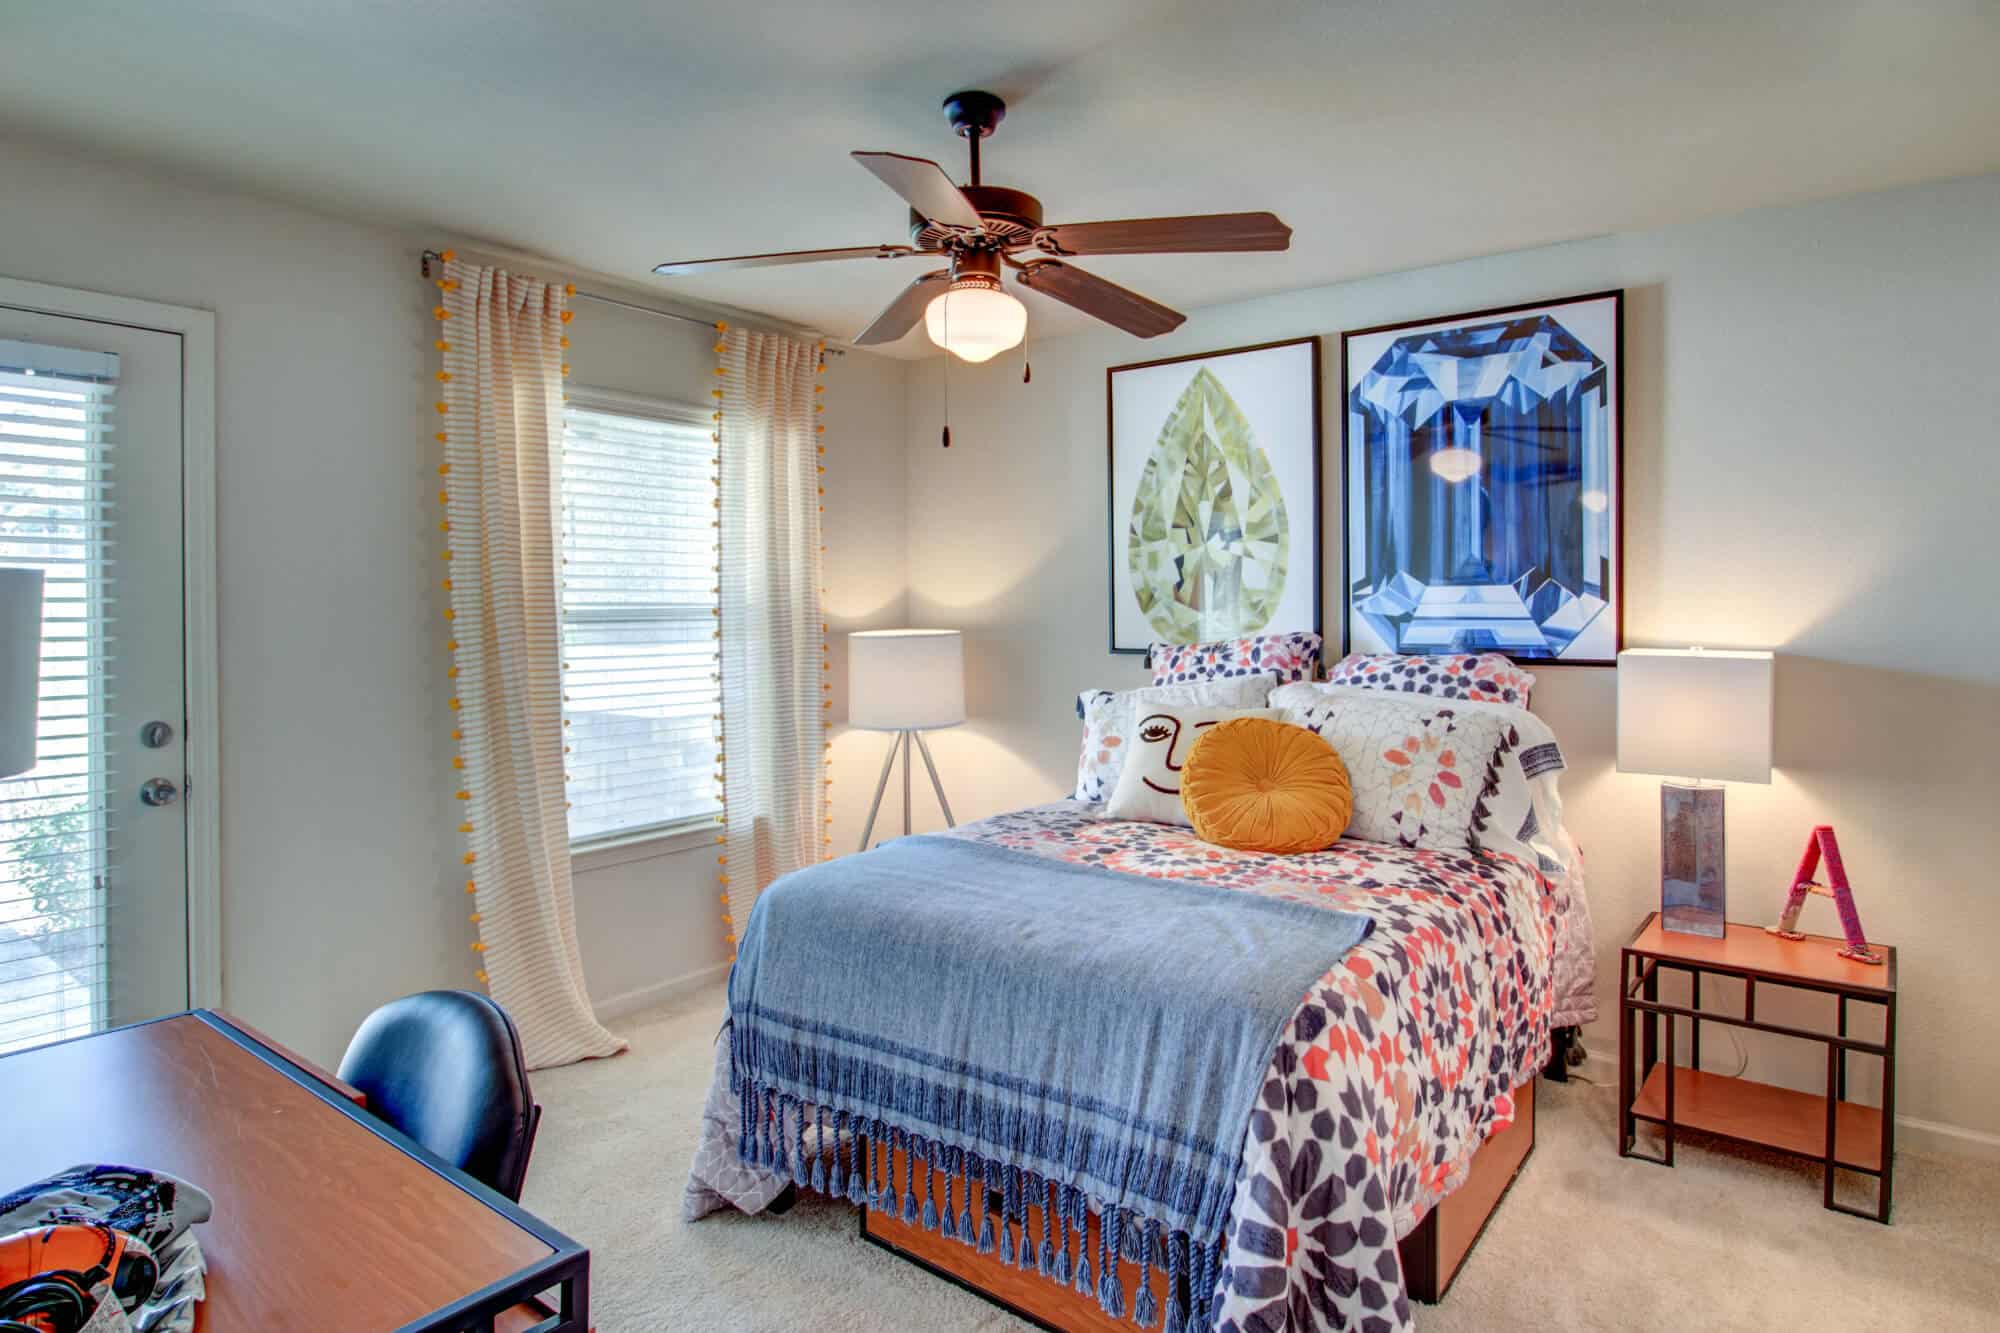 gateway at huntsville off campus apartments near sam houston state university shsu private bedroom fully furnished options available